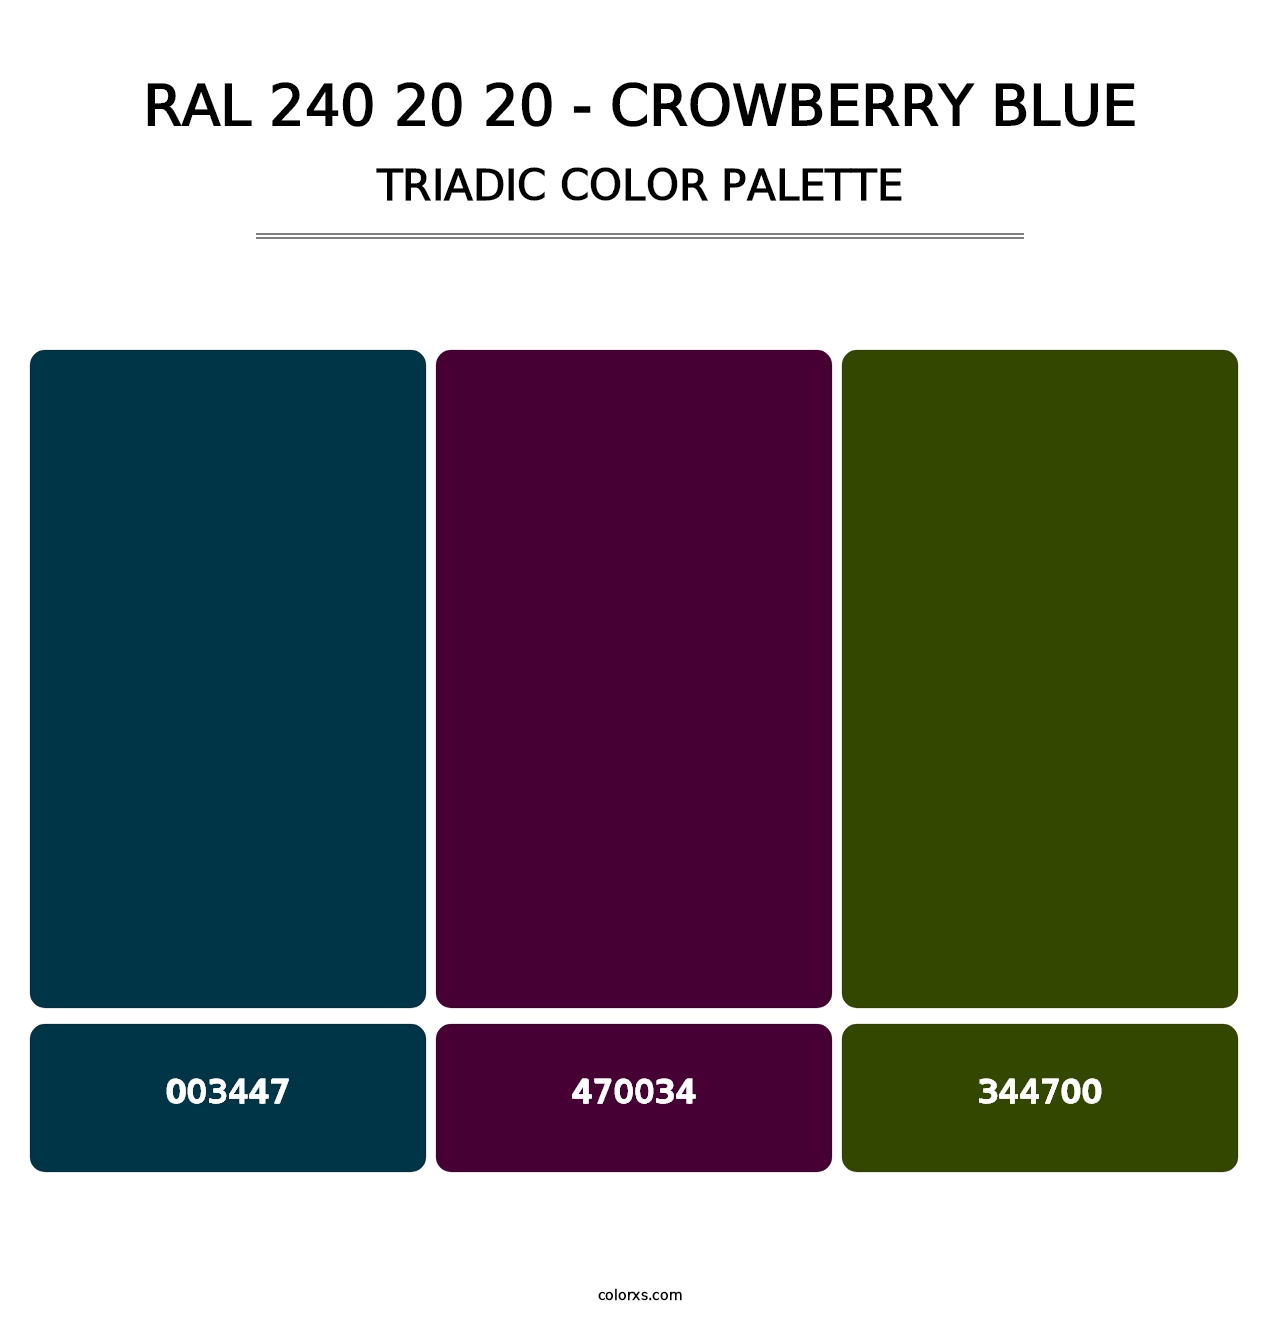 RAL 240 20 20 - Crowberry Blue - Triadic Color Palette